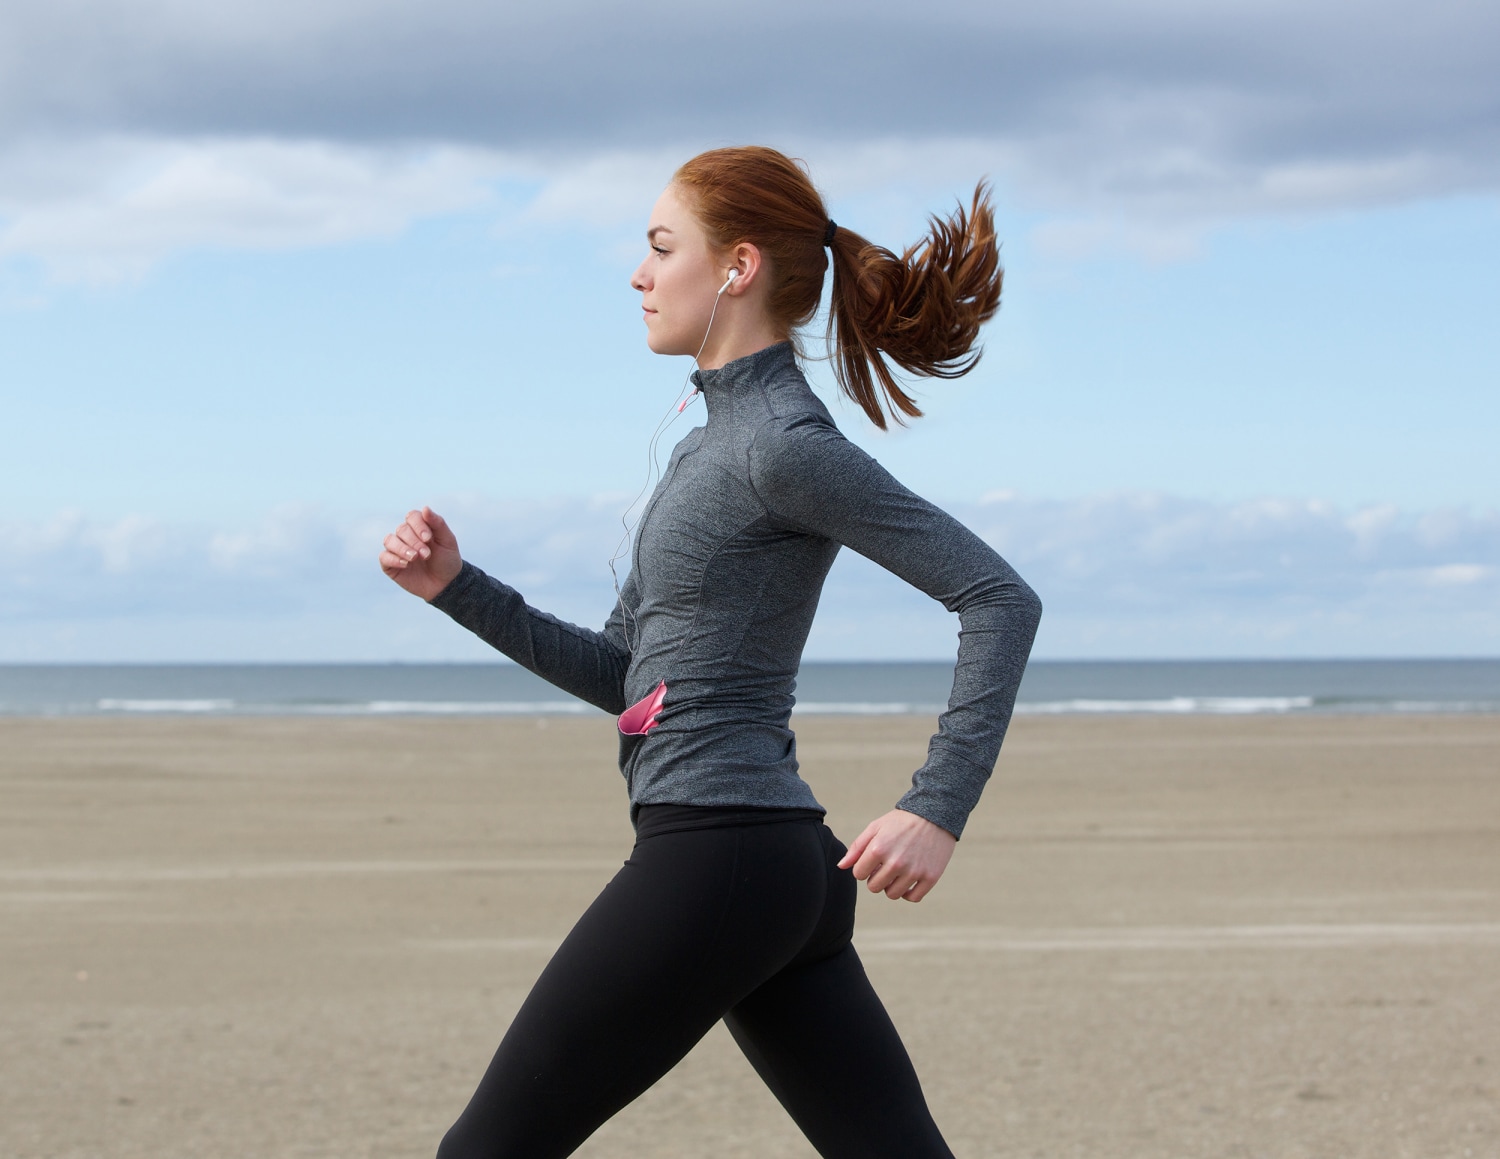 Fast walking vs. slow jogging: Which is better for weight loss